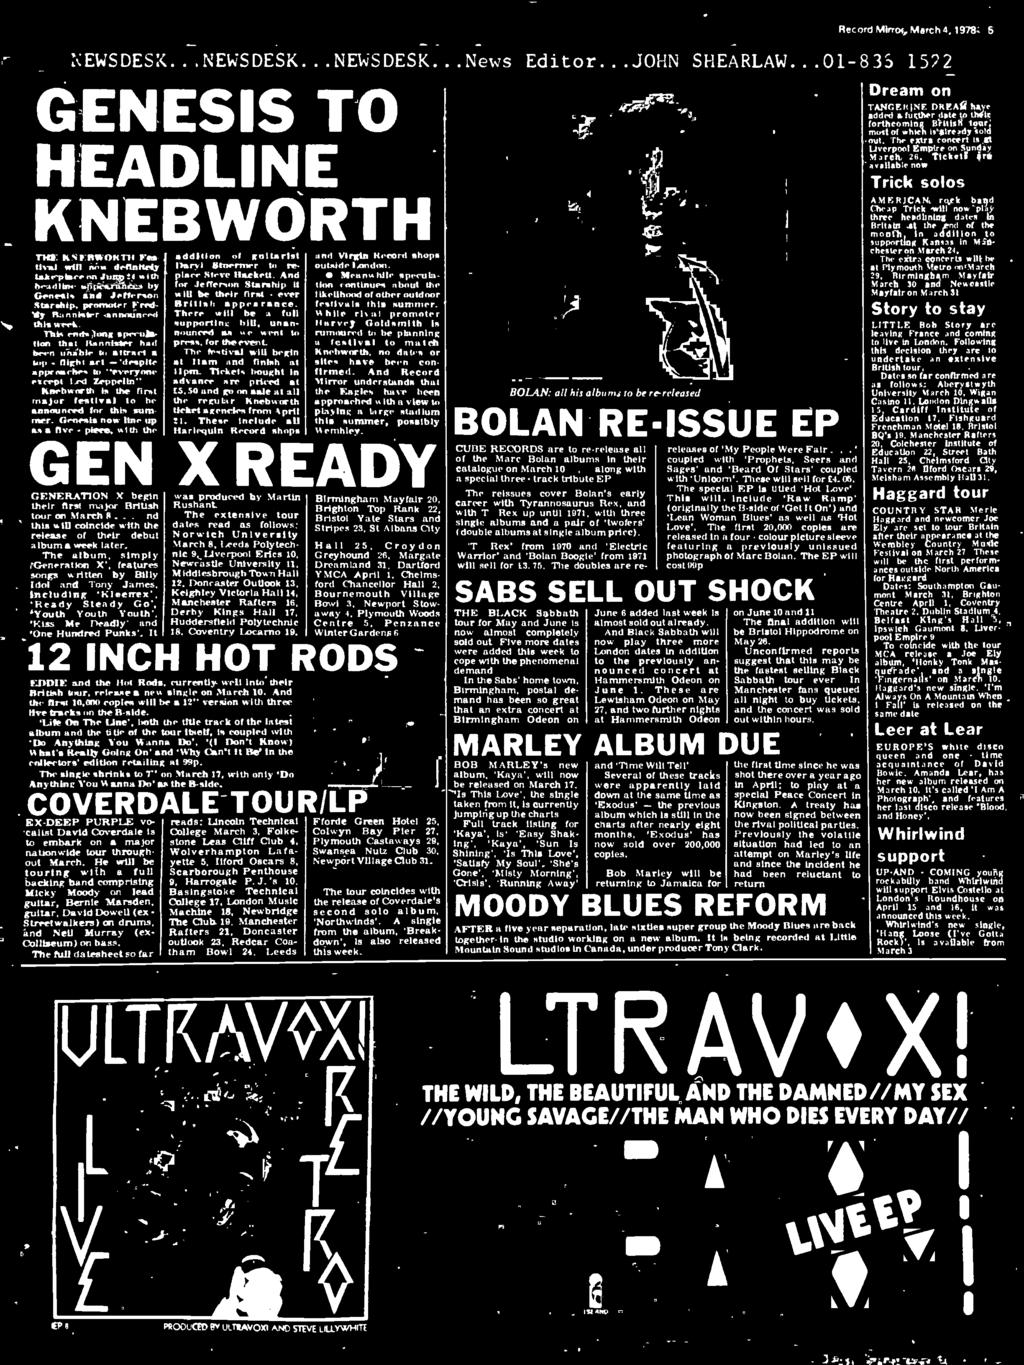 the regular Kneboorth tcket agences from Aprl These nclude all Harlequn Record shops GEN X REA GENERATON X begn ther frst major Brtsh tour on March 8 nd ths wll concde wth the release of ther debut